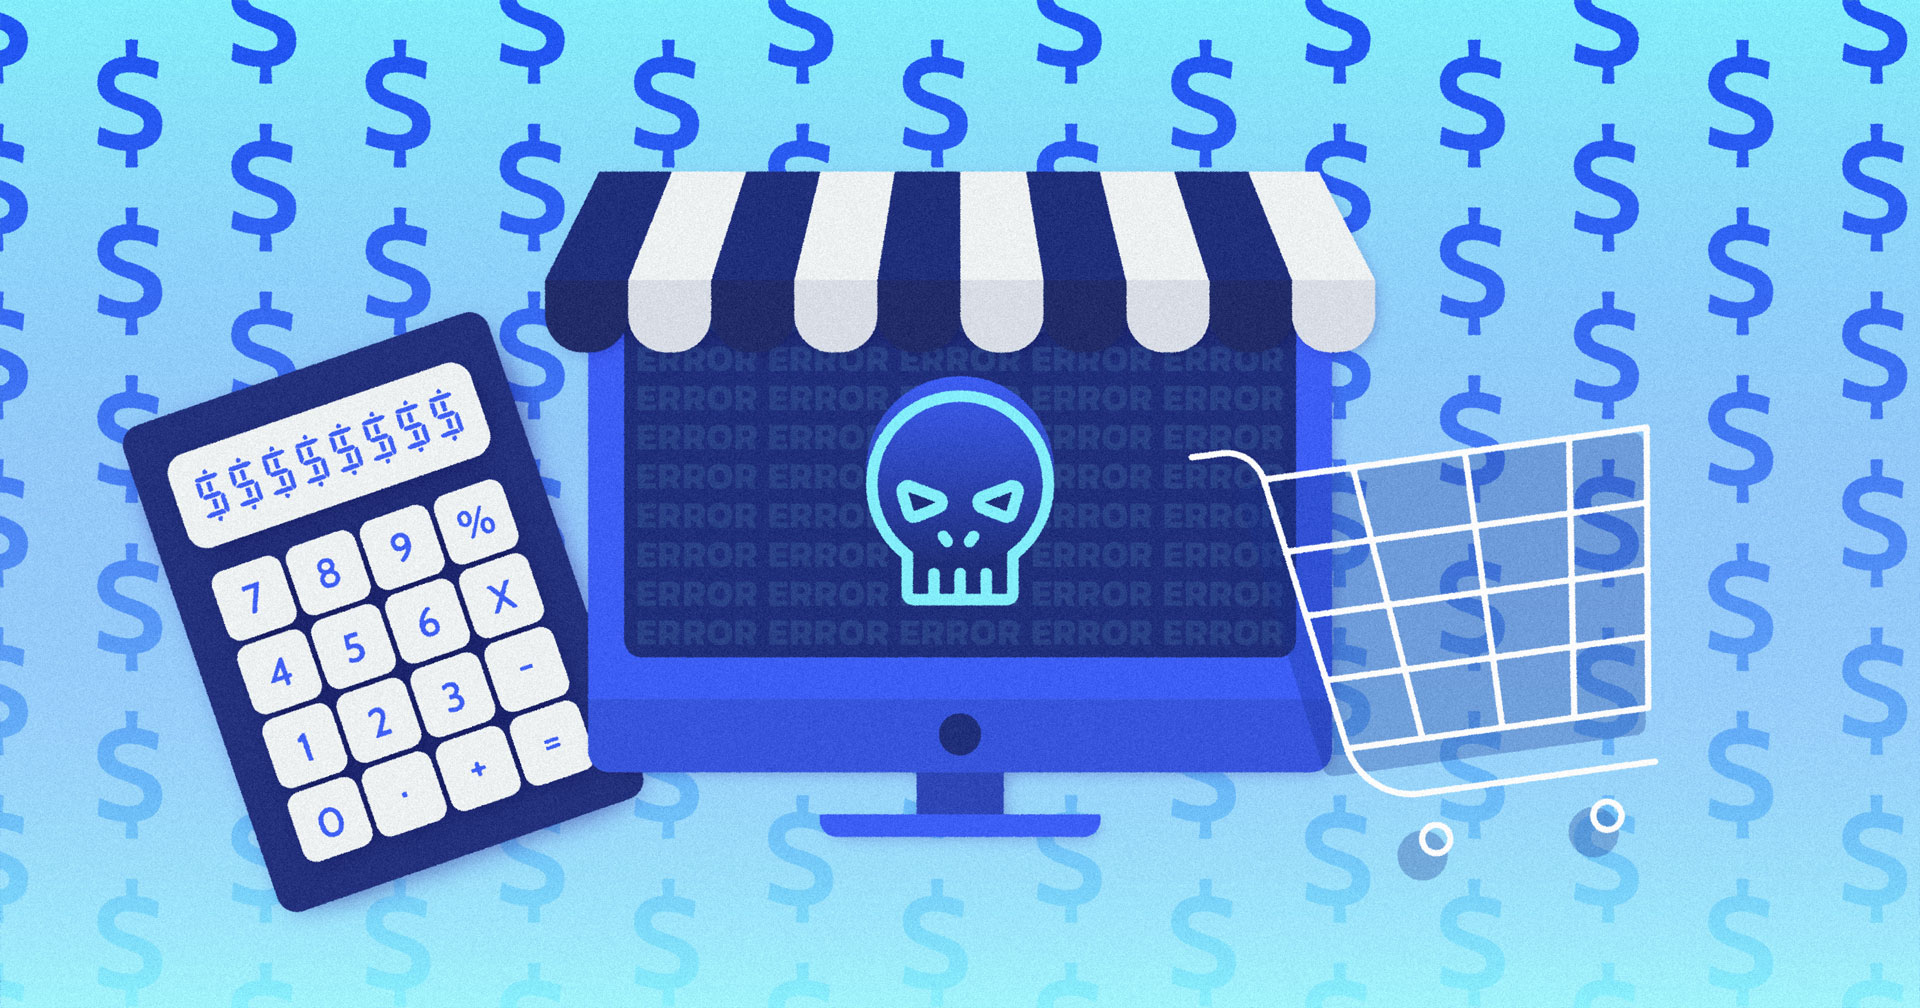 Downtime cost. Image shows a computer screen on a blue background with a skull on the screen. There is a calculator with dollar signs across the screen.